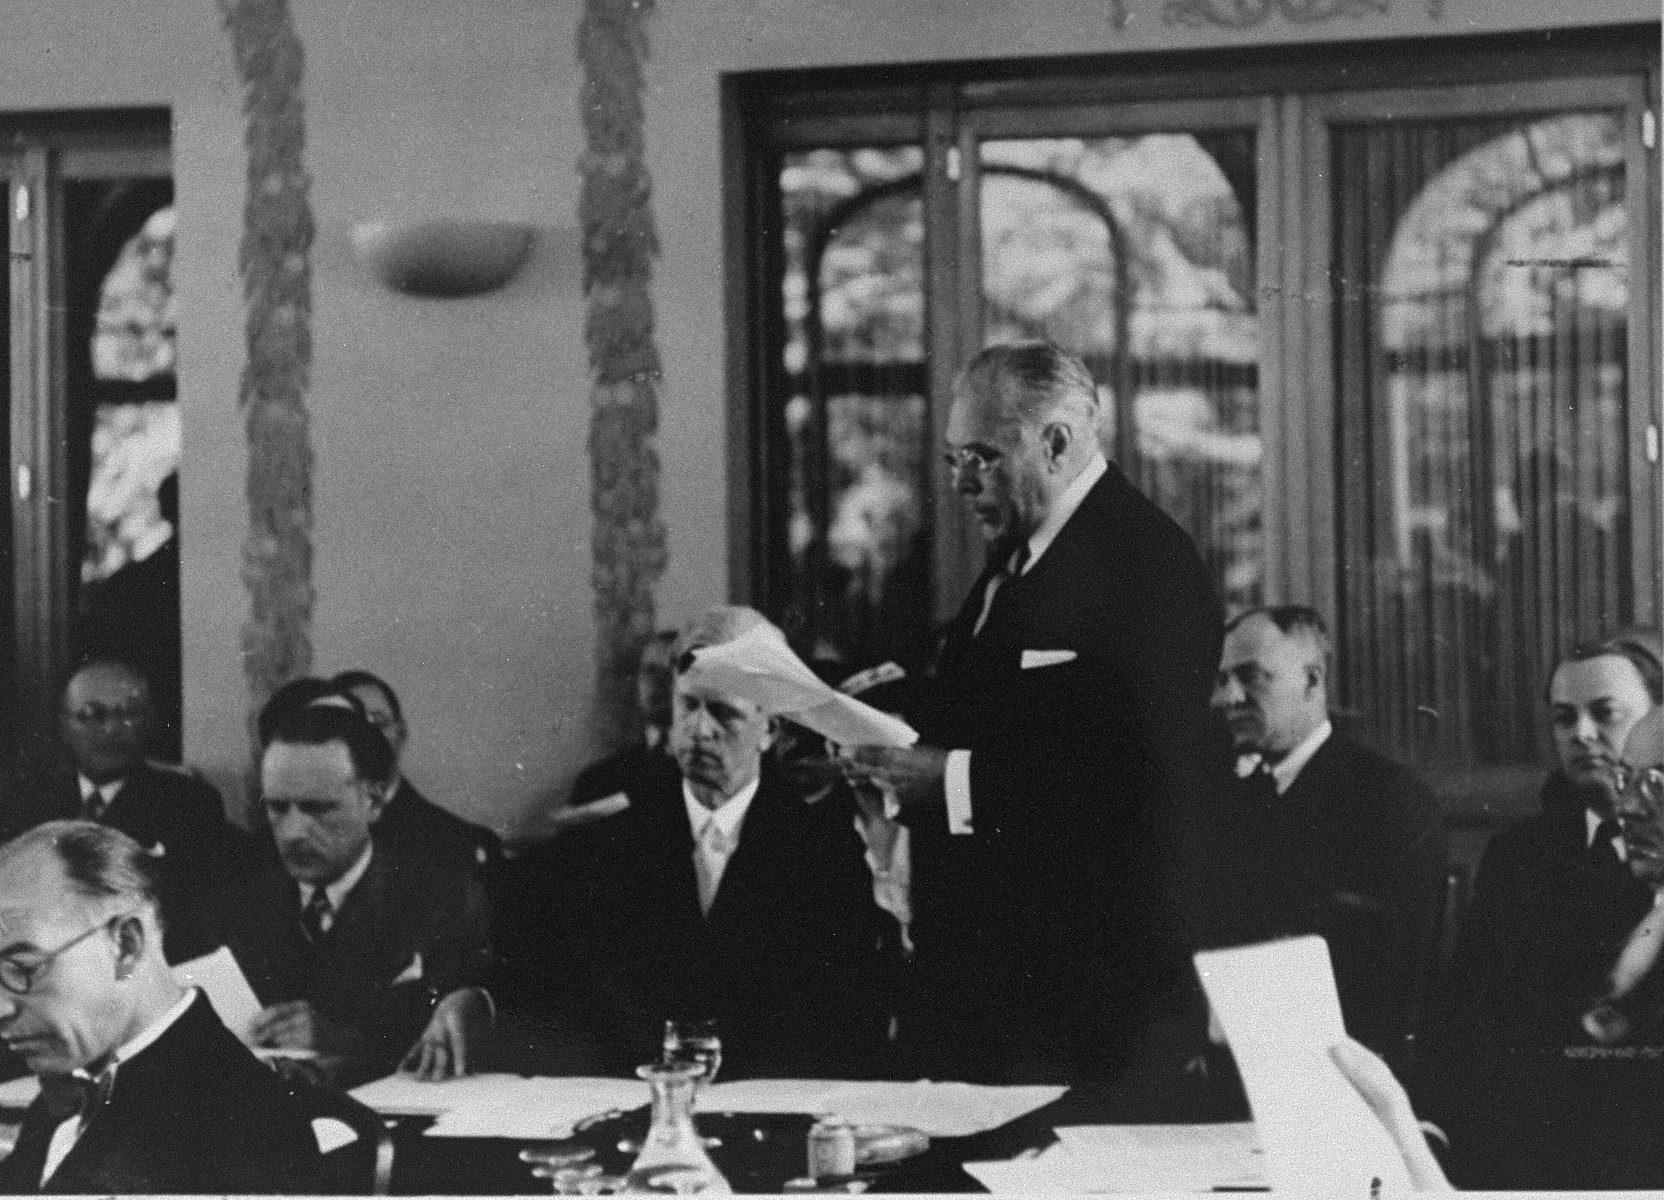 Myron Taylor addresses the International Conference on Refugees at Evian-les-Bains.

James Grover McDonald is seated next to him.  On the far right edge of the picture is Robert Thompson Pell, an assistant to Myron Taylor at State.  The man looking down, second from left of Taylor, with a dark tie and mustache is Georges Coulon.